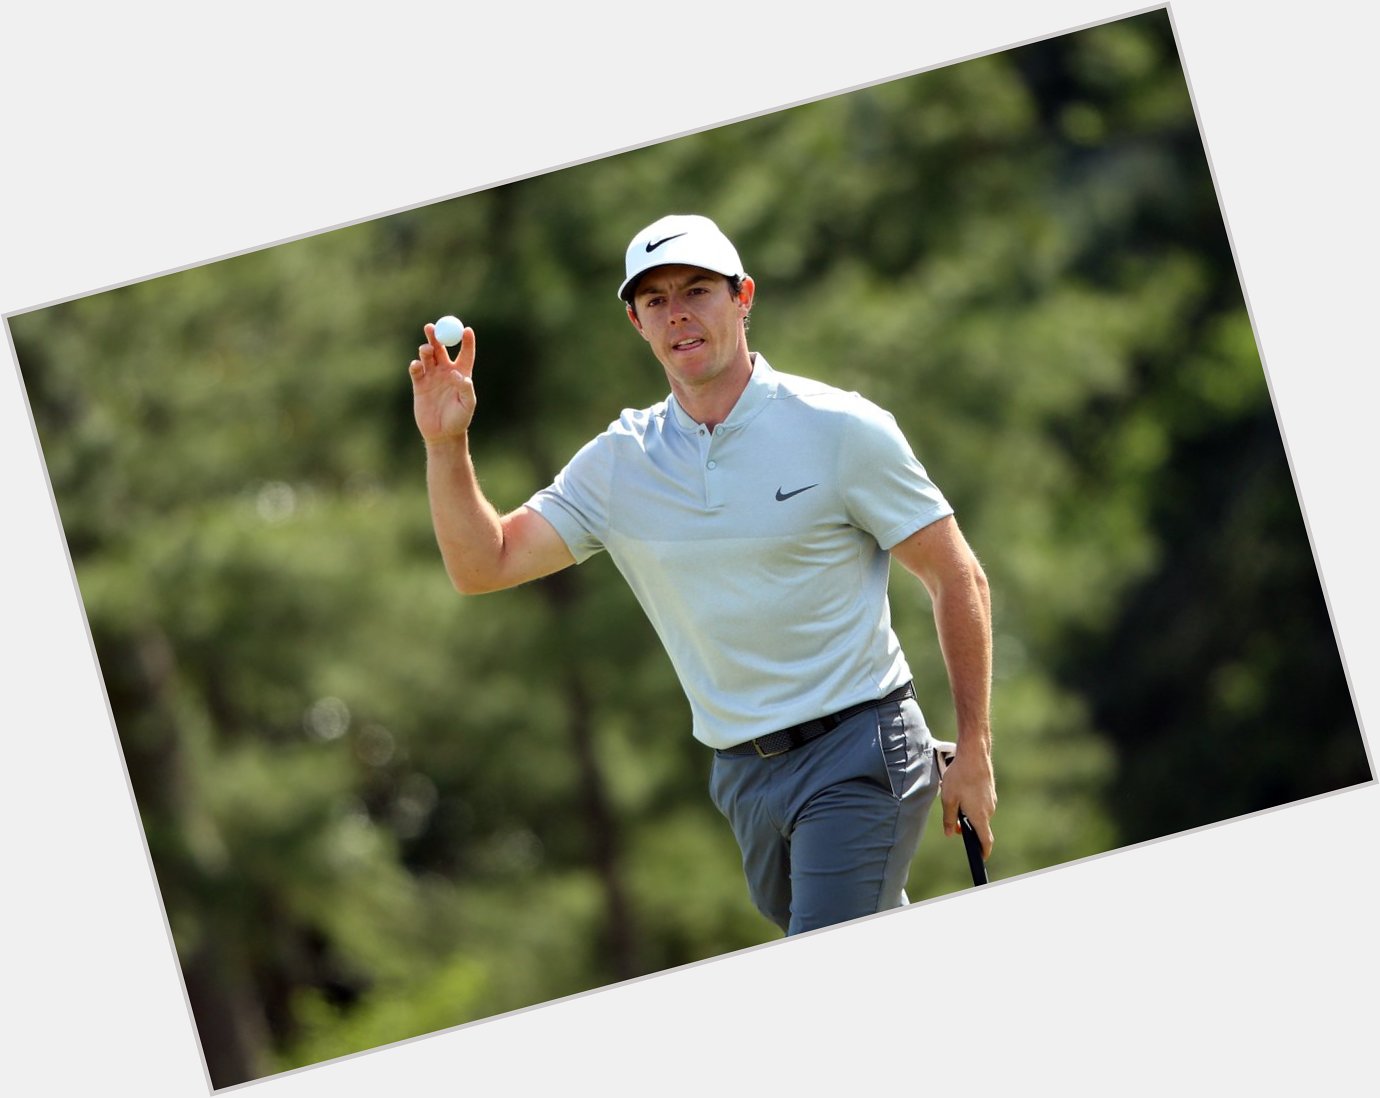 US Open  The Open  PGA Championship  All by the age of 25  Happy birthday to the newlywed Rory McIlroy 